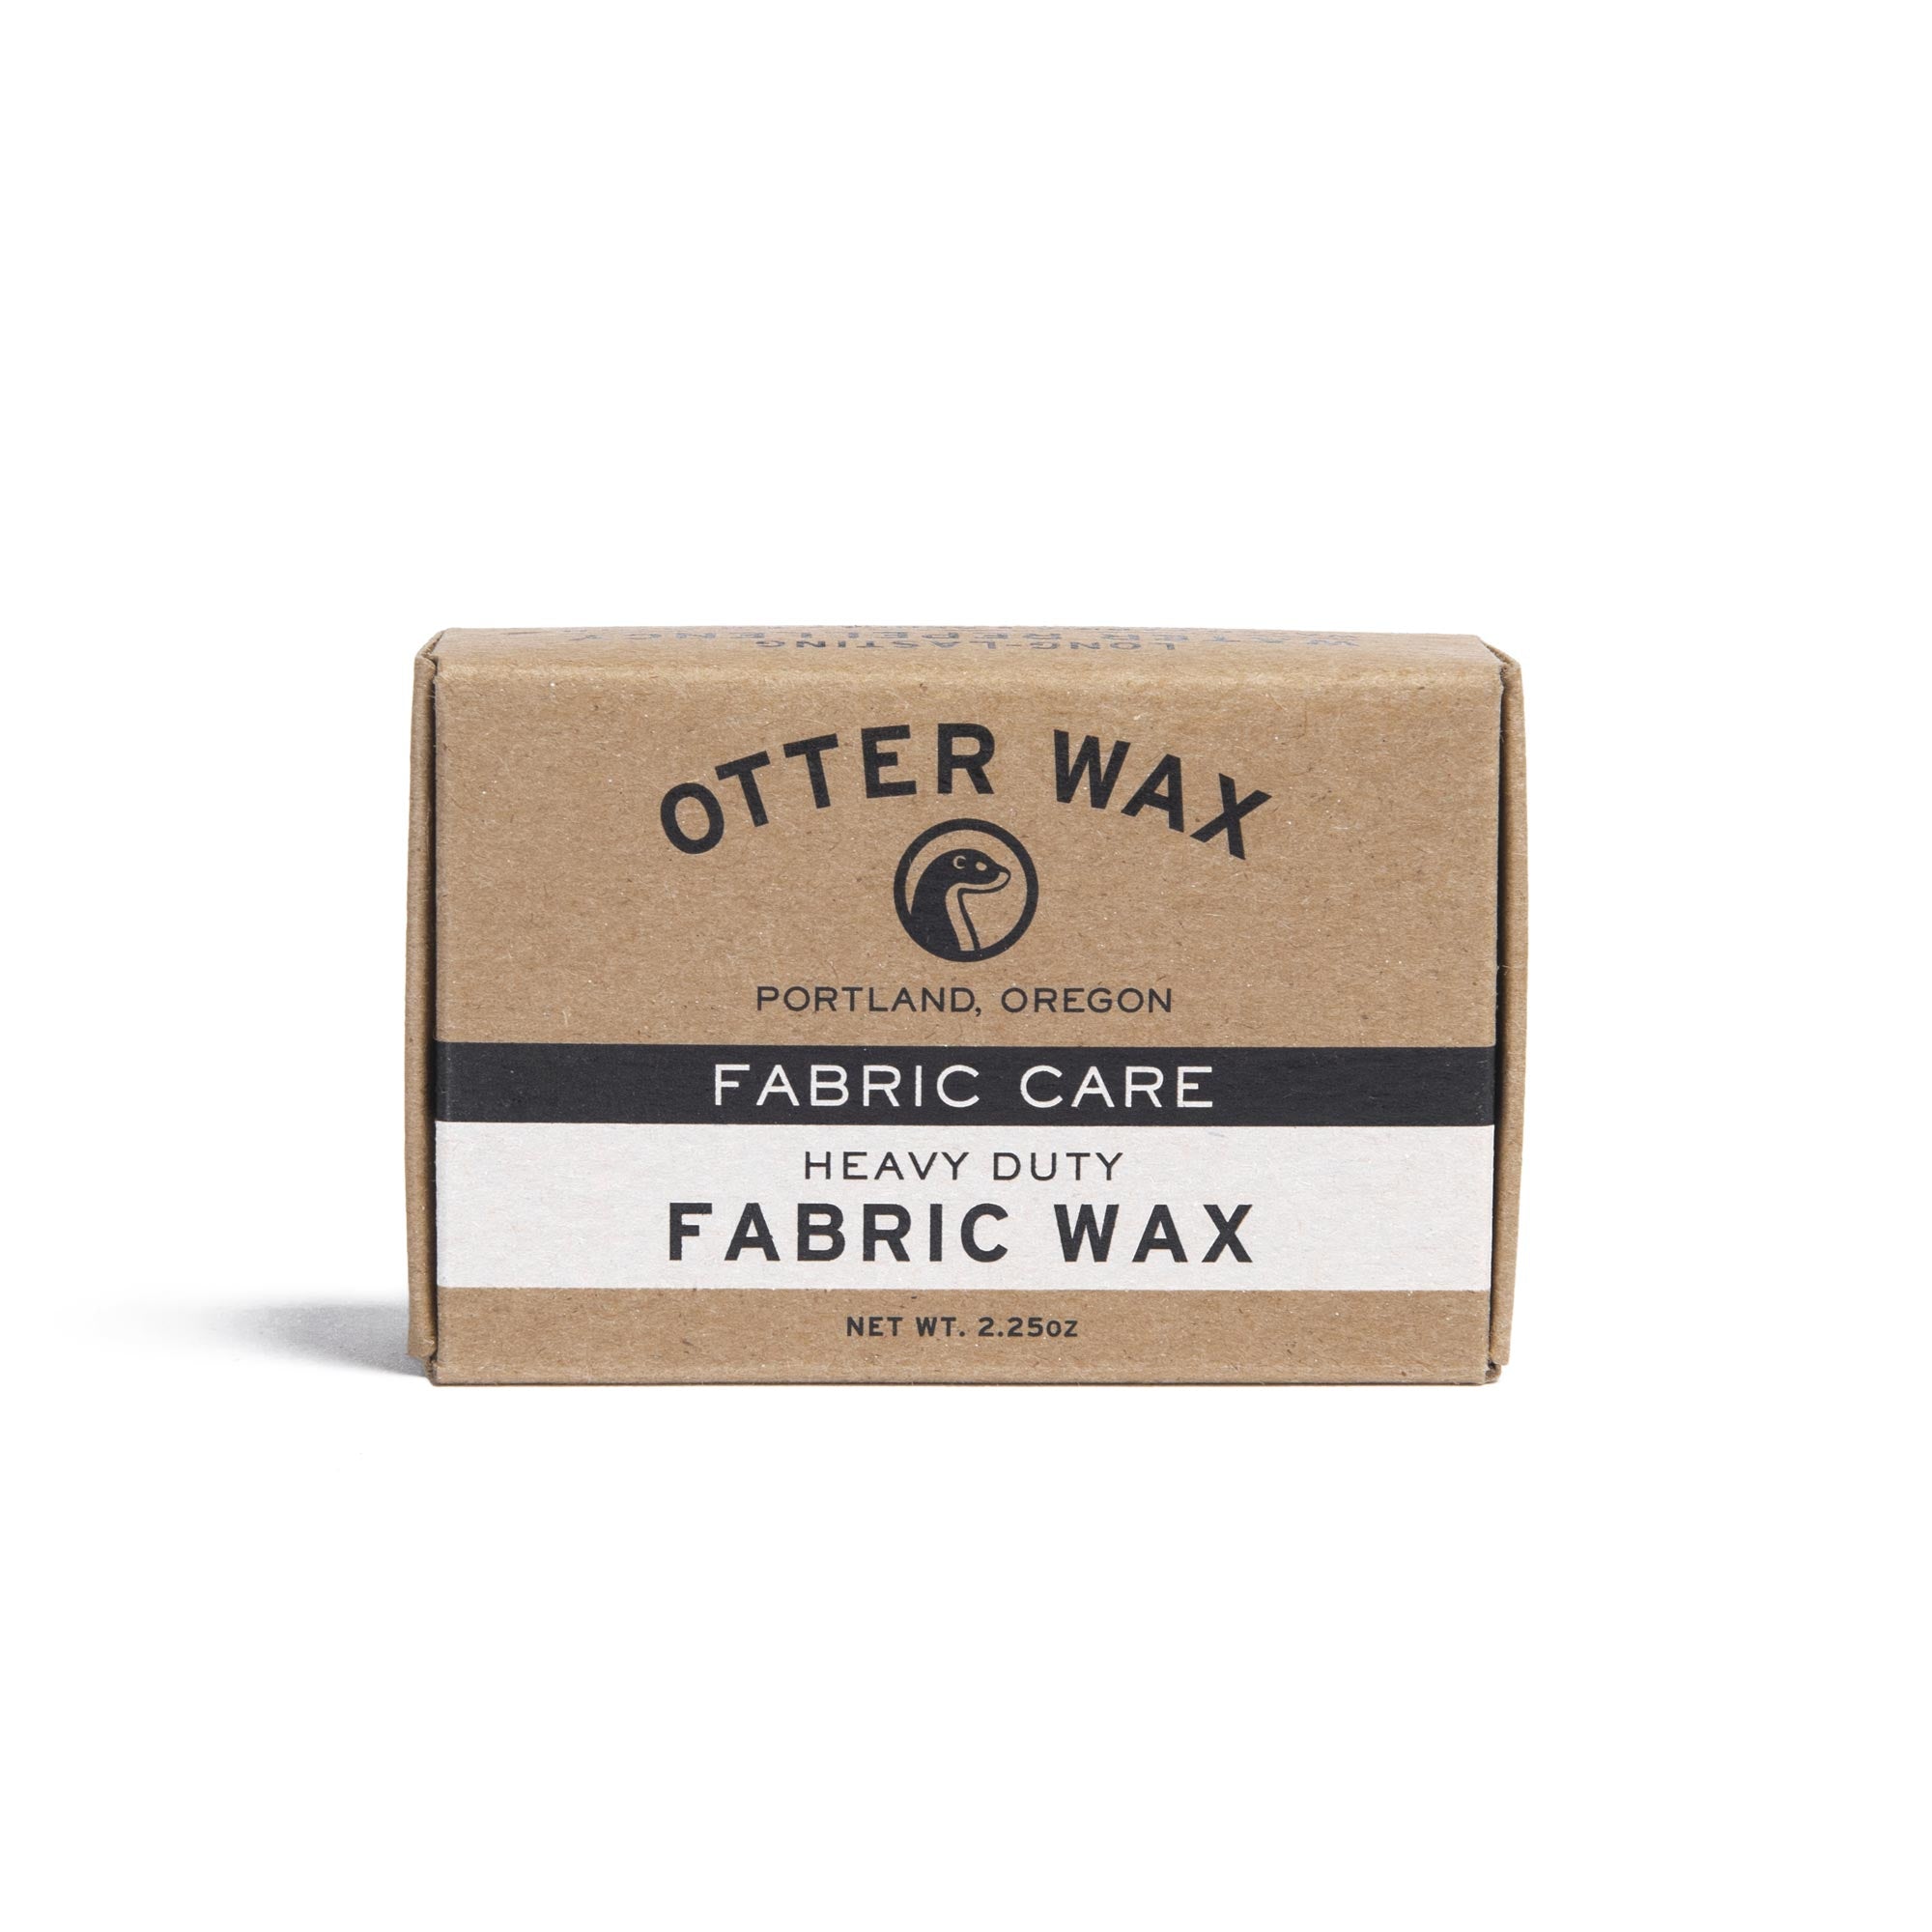  Otter Wax Saddle Soap, 5oz, All-Natural Universal Leather  Cleaner